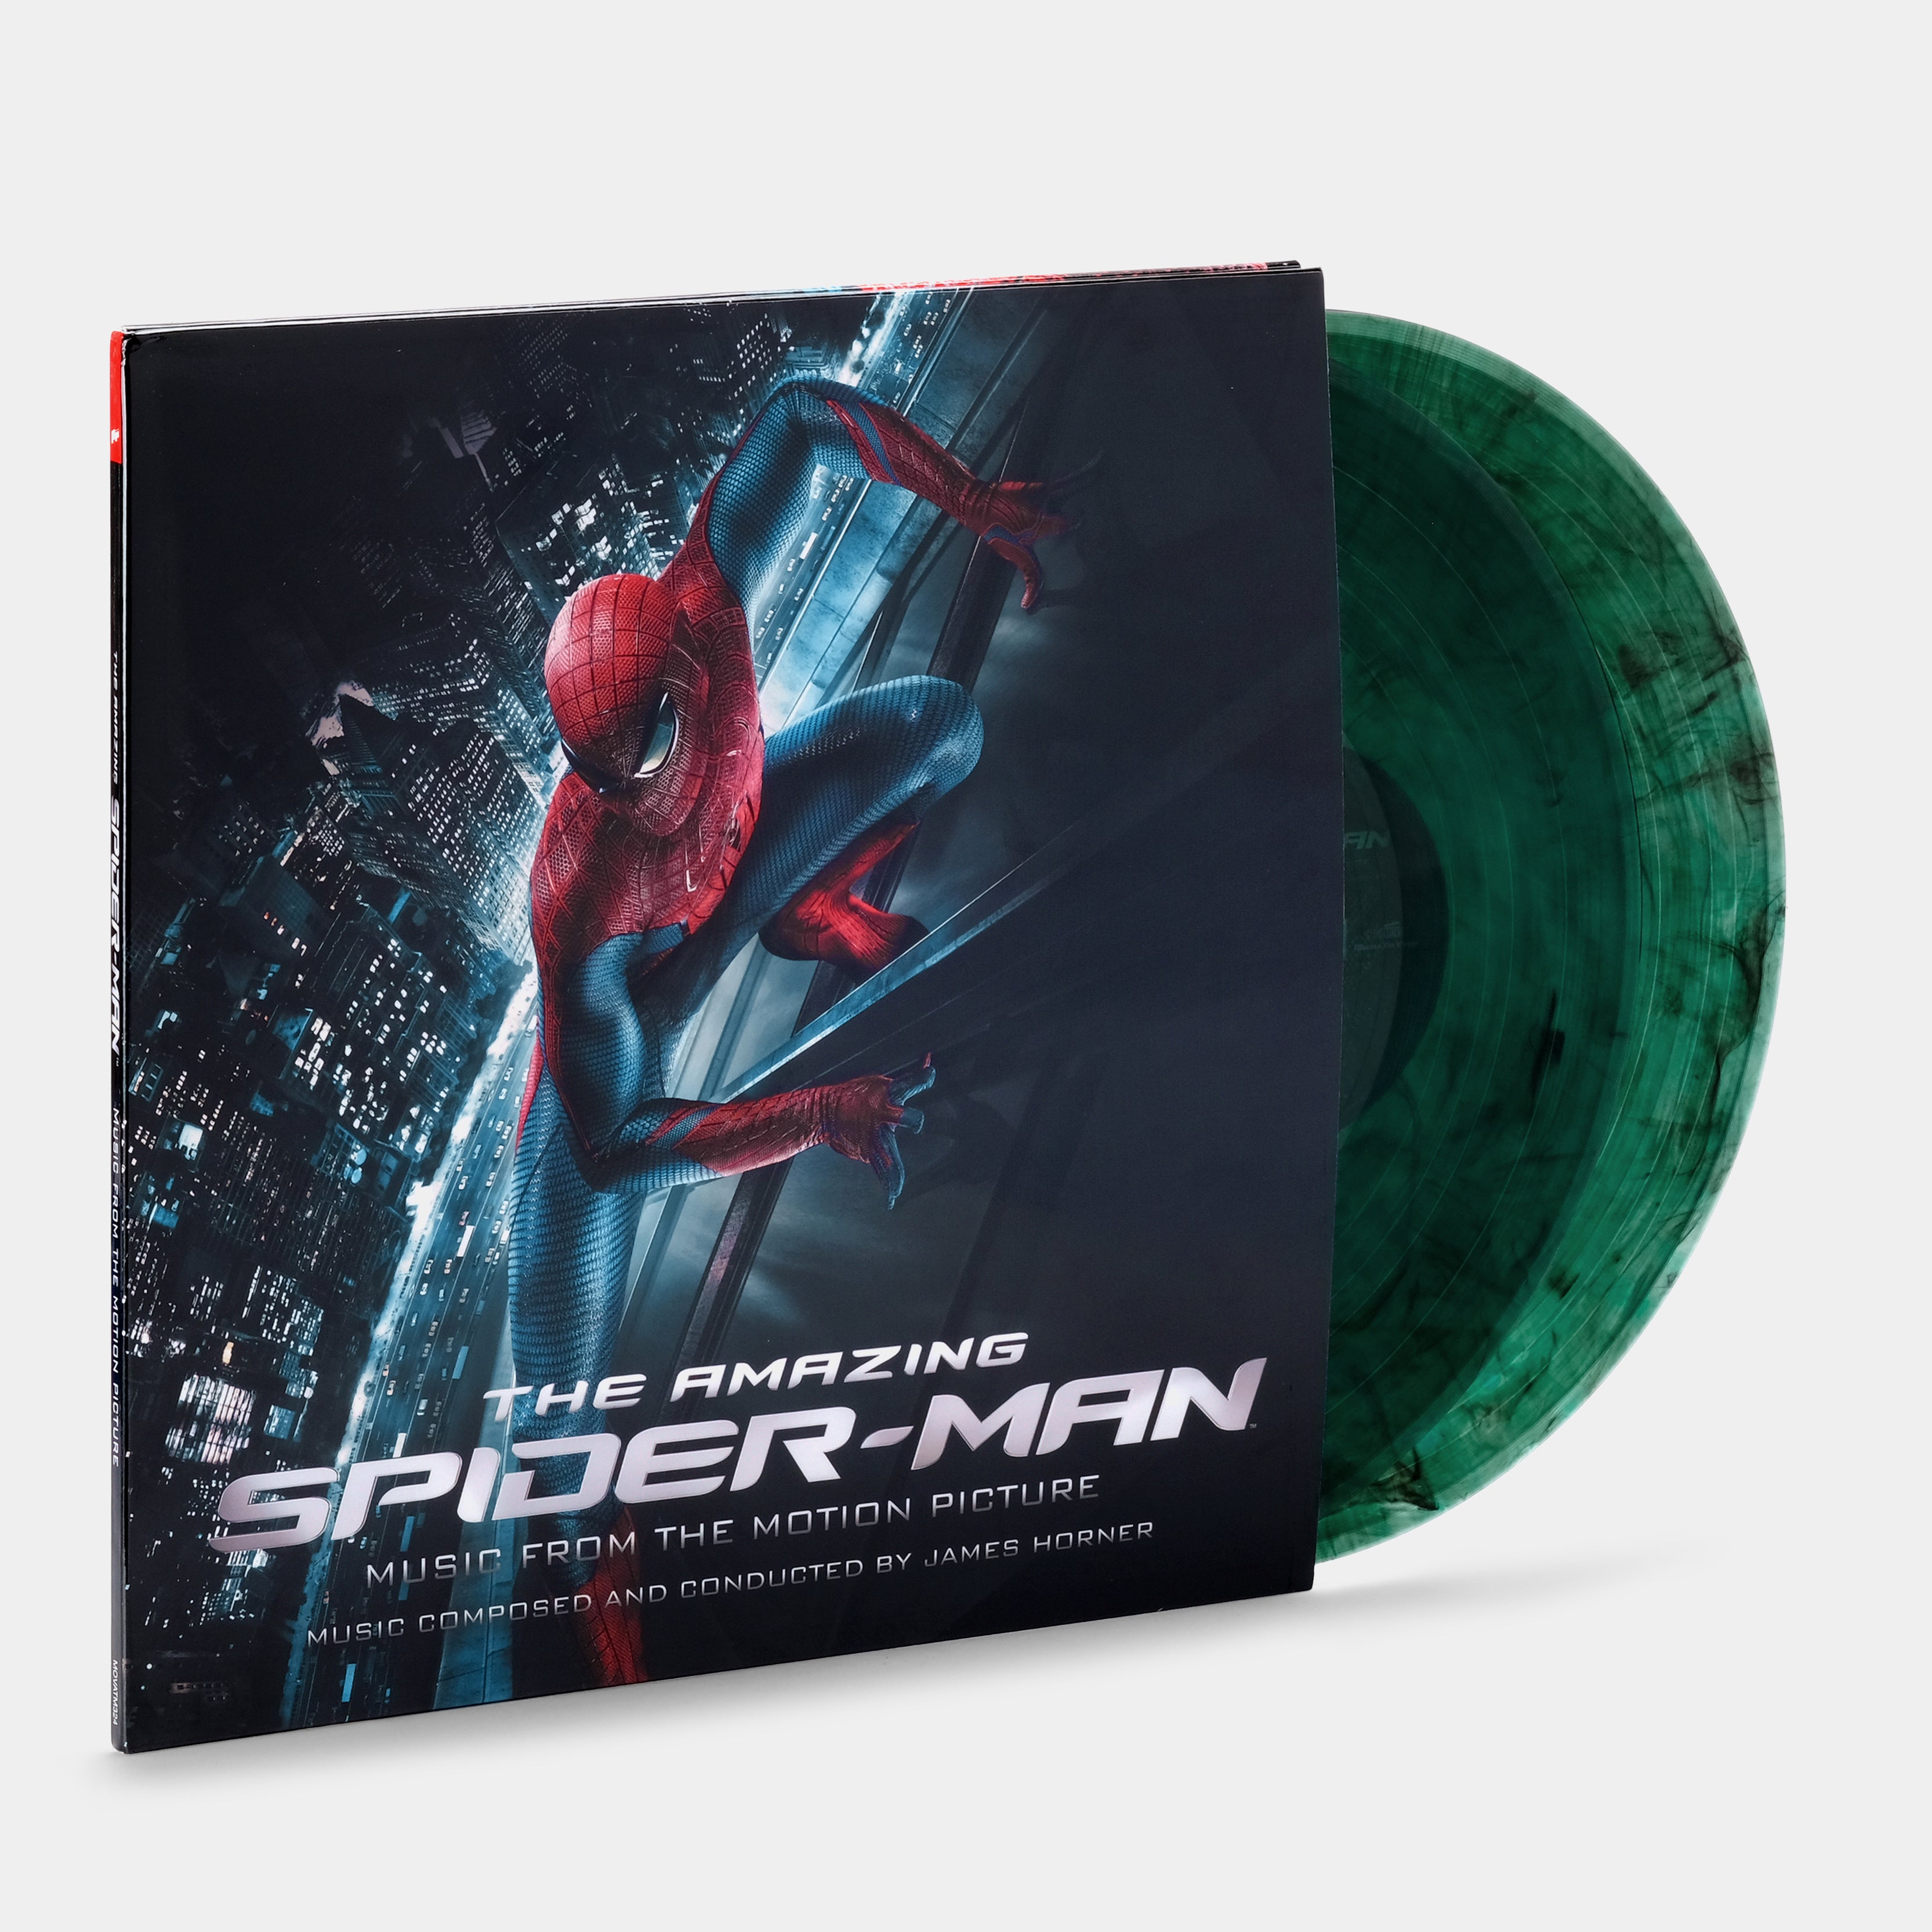 James Horner - The Amazing Spider-Man: Music From The Motion Picture LP Green & Black Marbled Vinyl Record